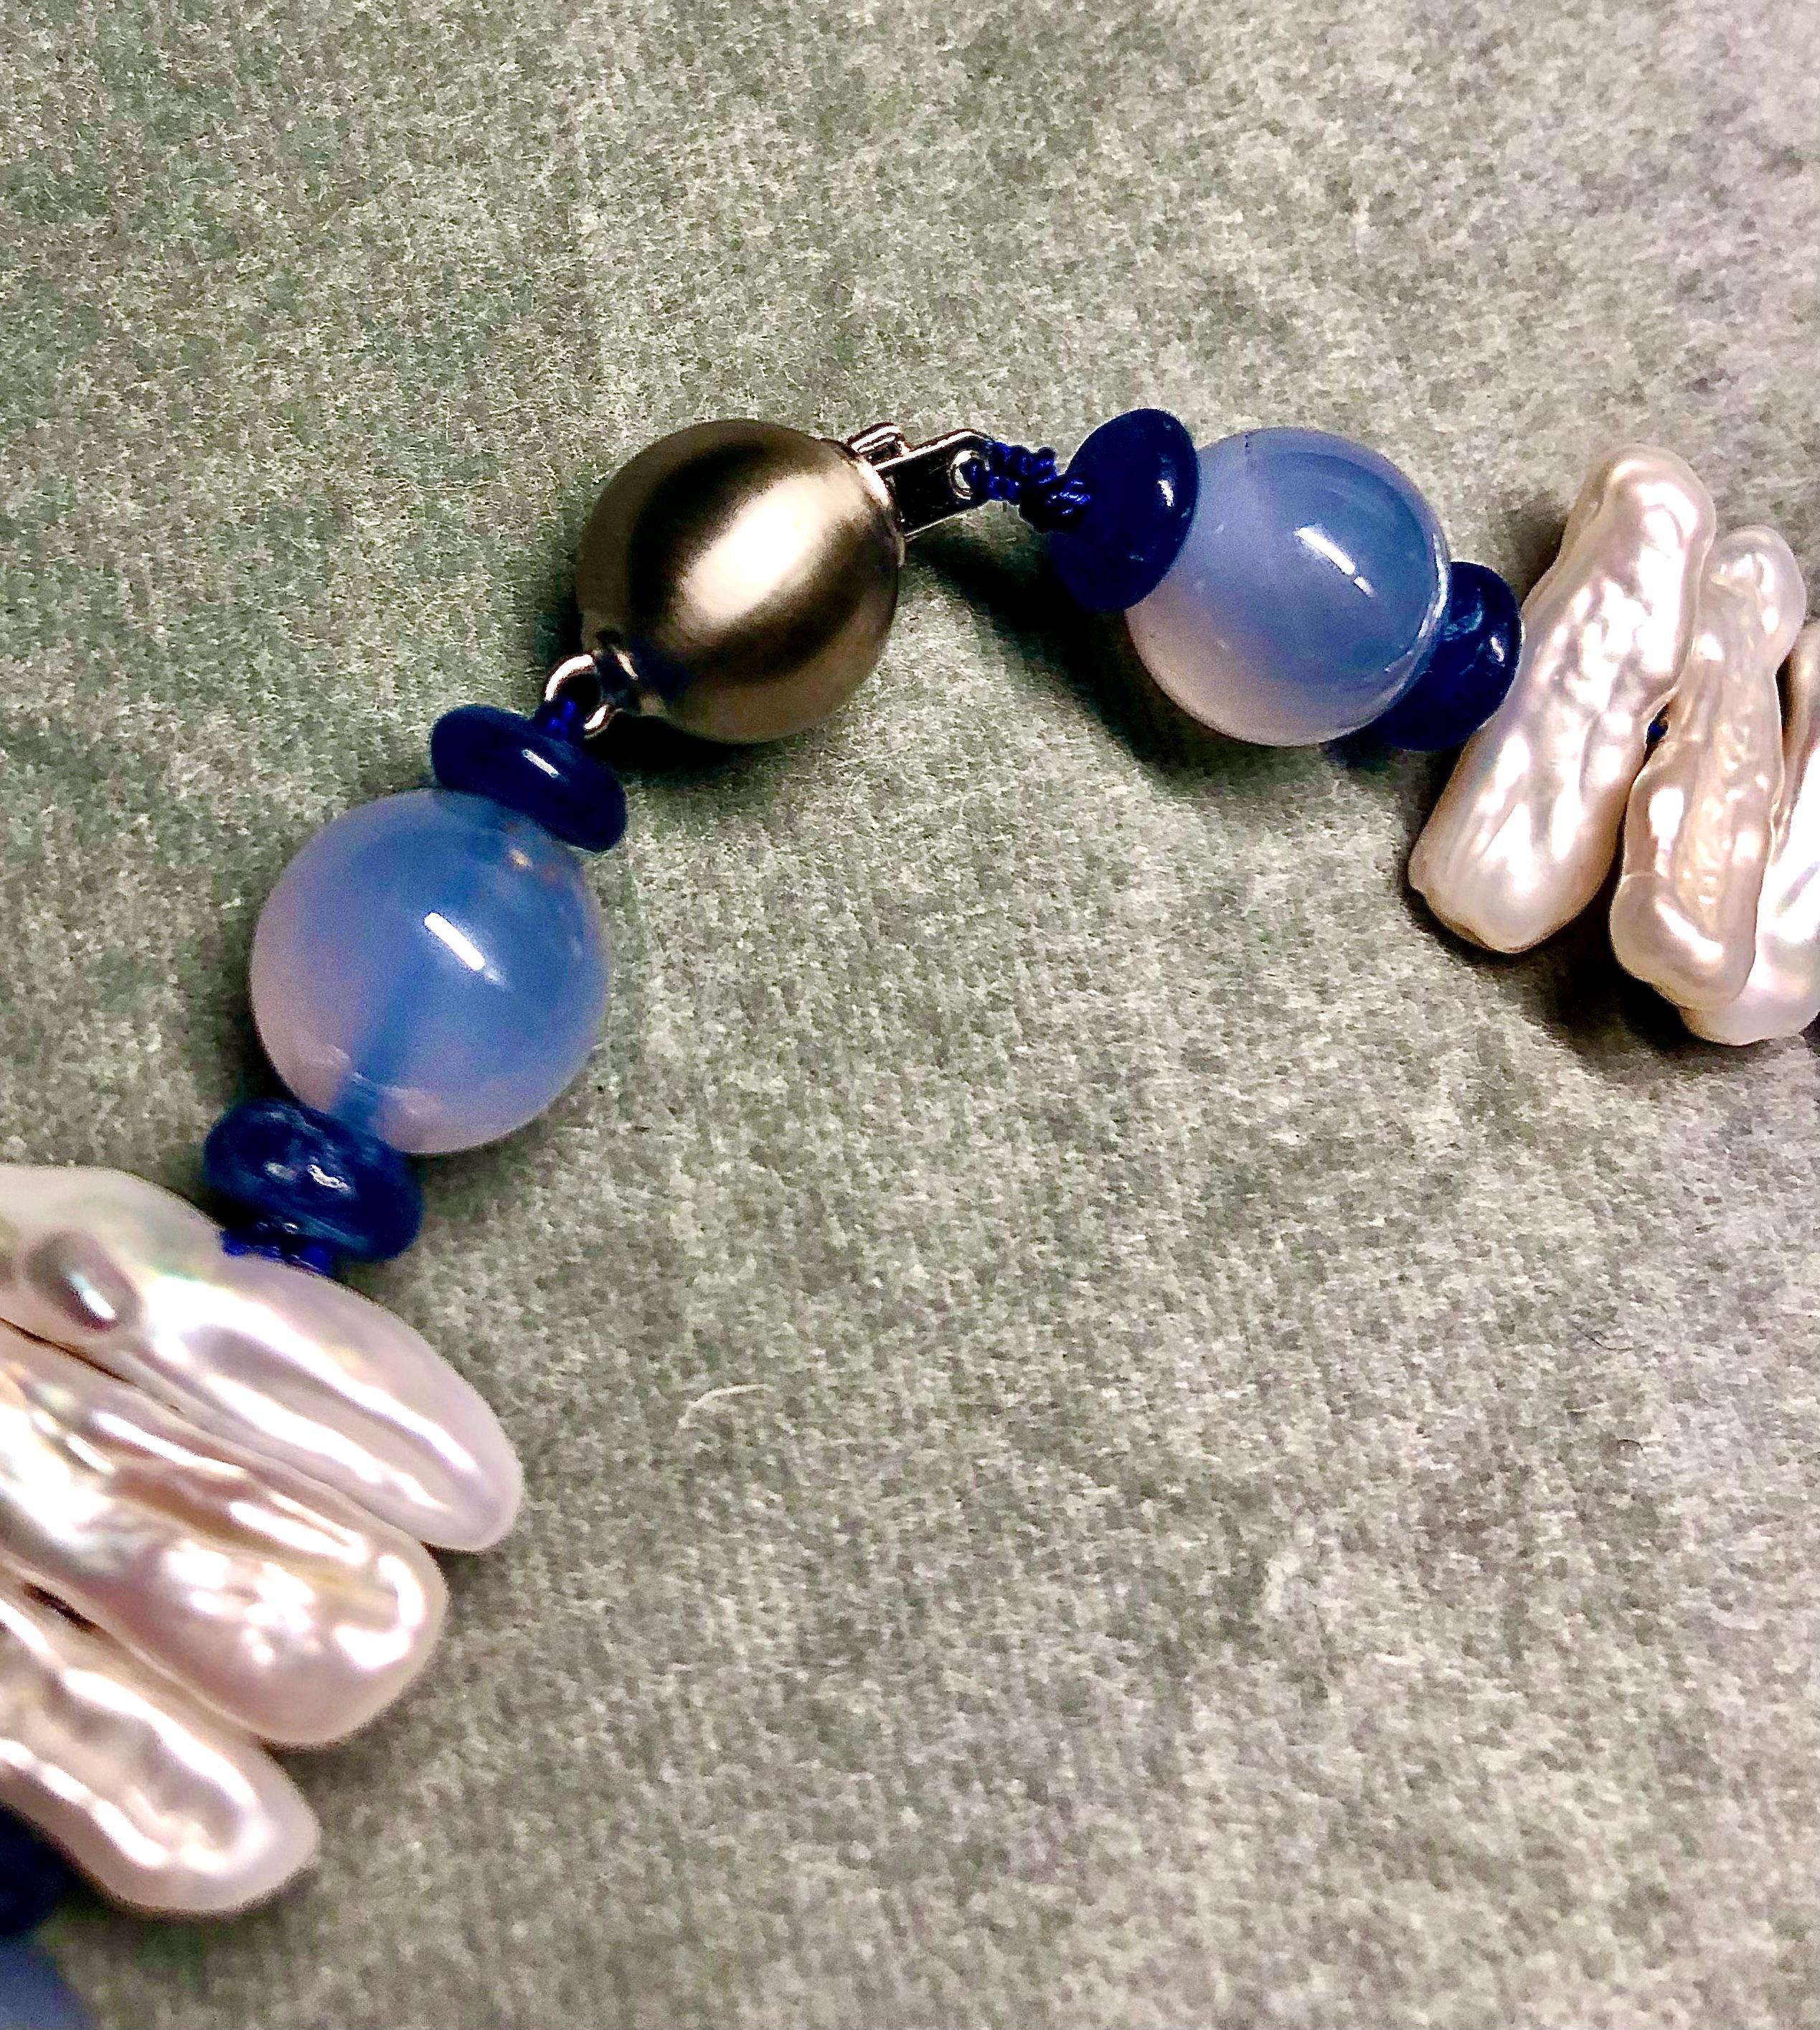 Unusual and striking abstract juxtaposition of luminous blue chalcedony spheres flanked by blue sapphire rondelles. Interspersed with lustrous Keishi solid nacre stick pearls. A pretty necklace that works for both day and night. Finished with a